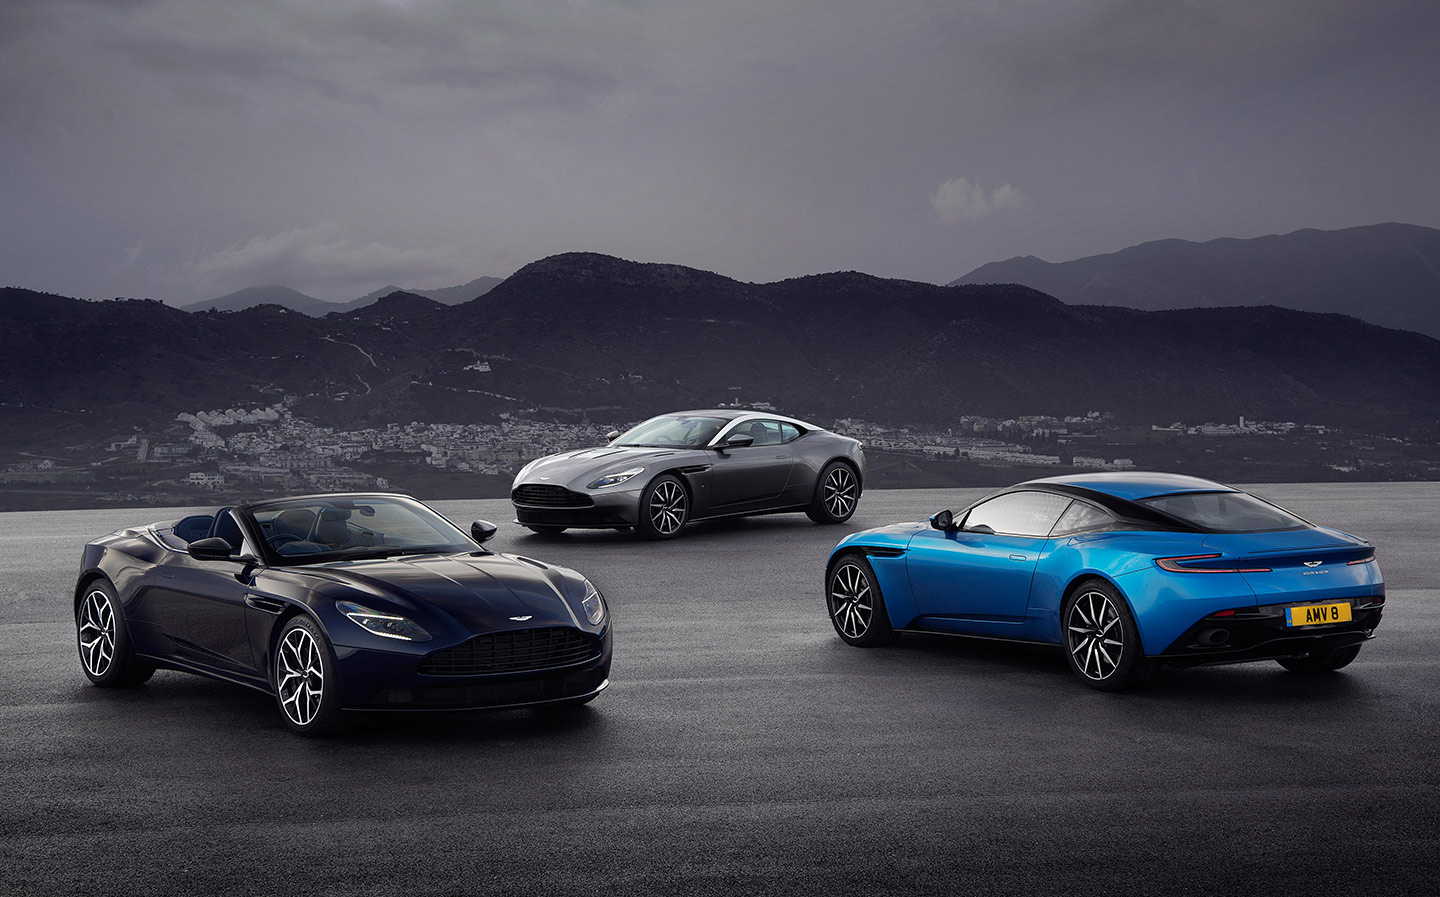 Boom-time for Aston Martin as brand value leaps 268% to $3.6bn